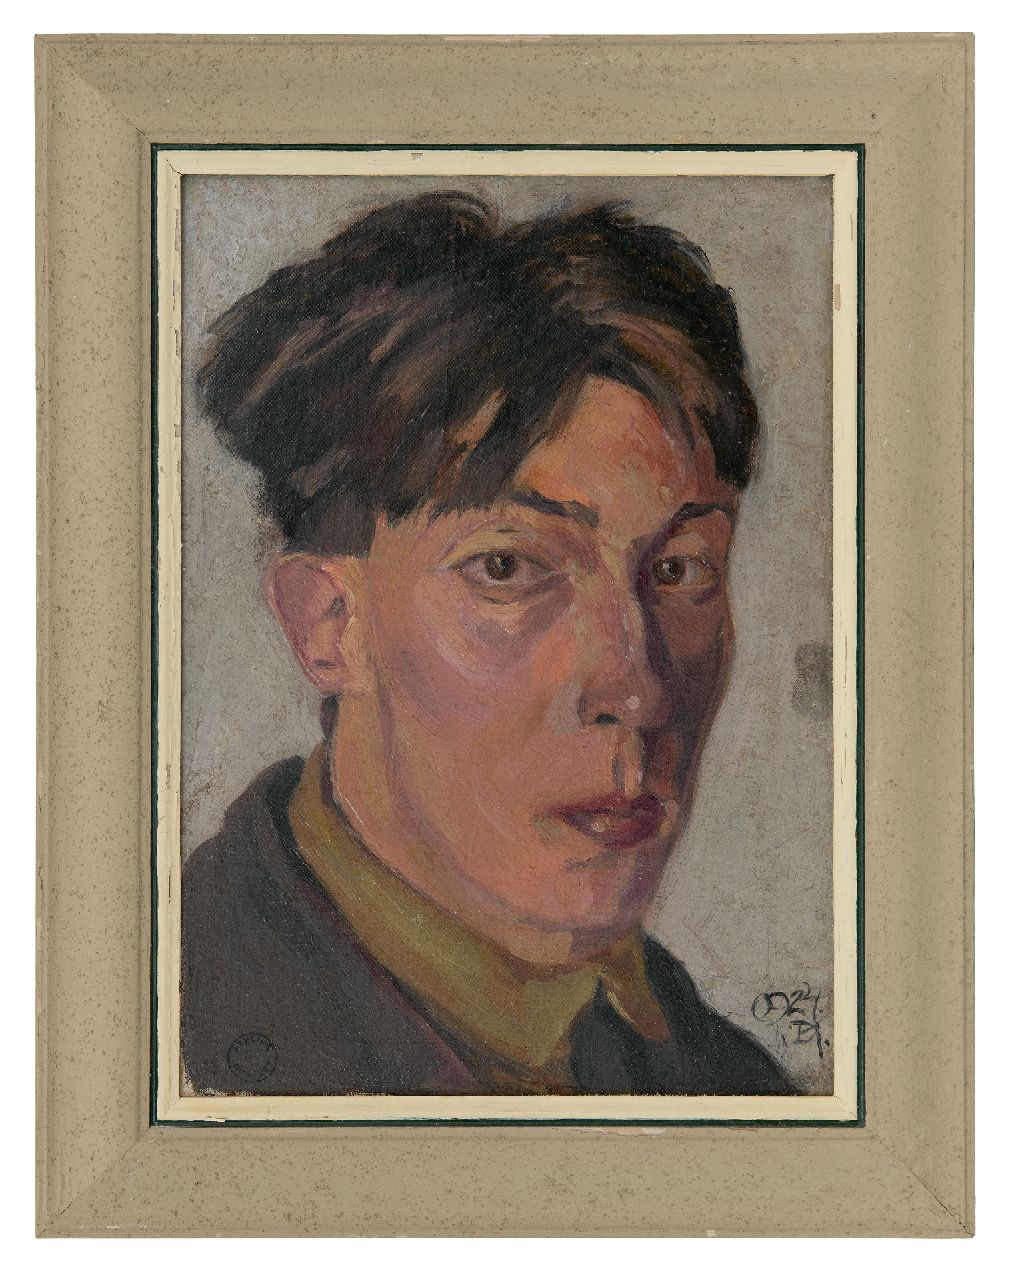 Ket D.H.  | Dirk Hendrik 'Dick' Ket | Paintings offered for sale | Self-portrait, turned to the right, oil on canvas laid down on panel 36.5 x 26.2 cm, signed l.r. and dated '24